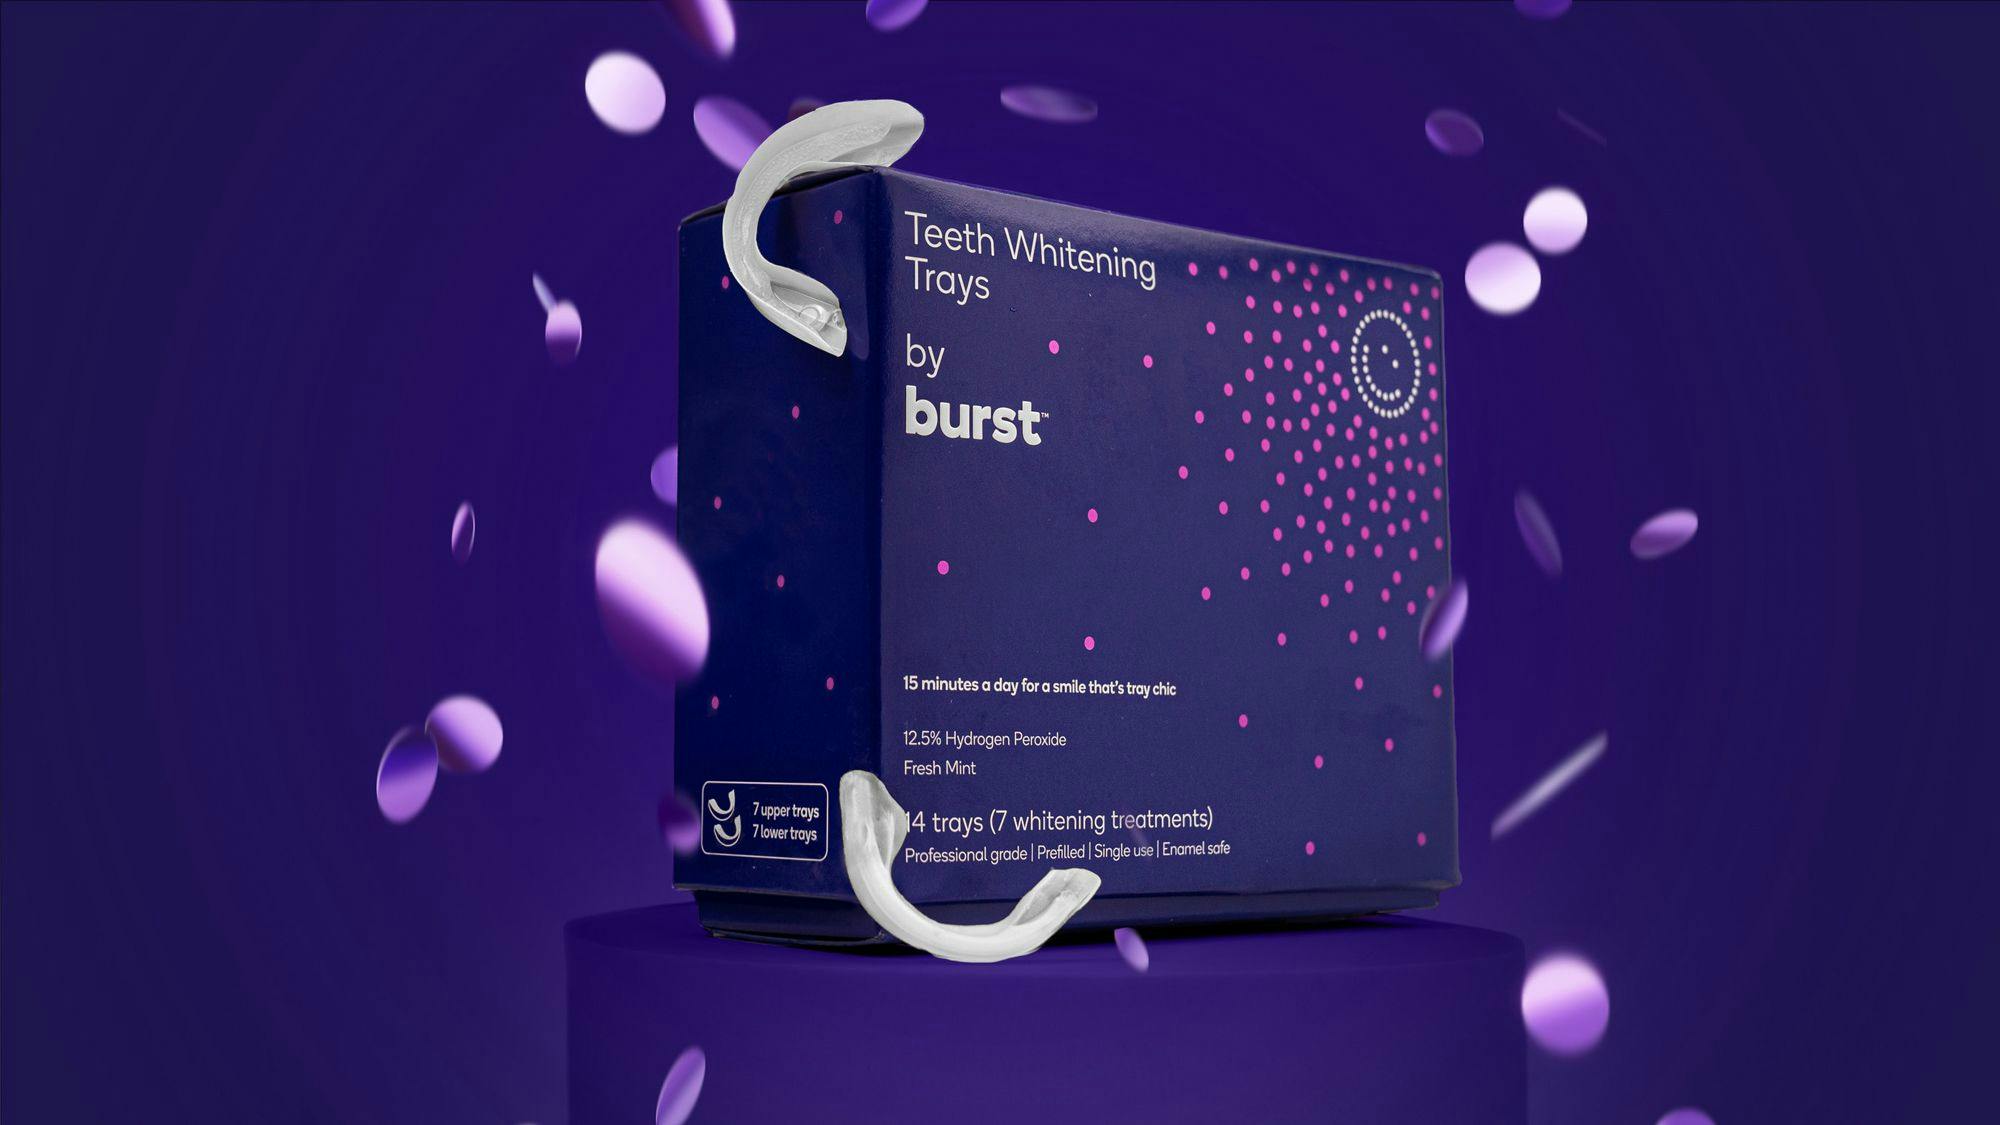 BURST Oral Care Announces Launch of Teeth Whitening Trays